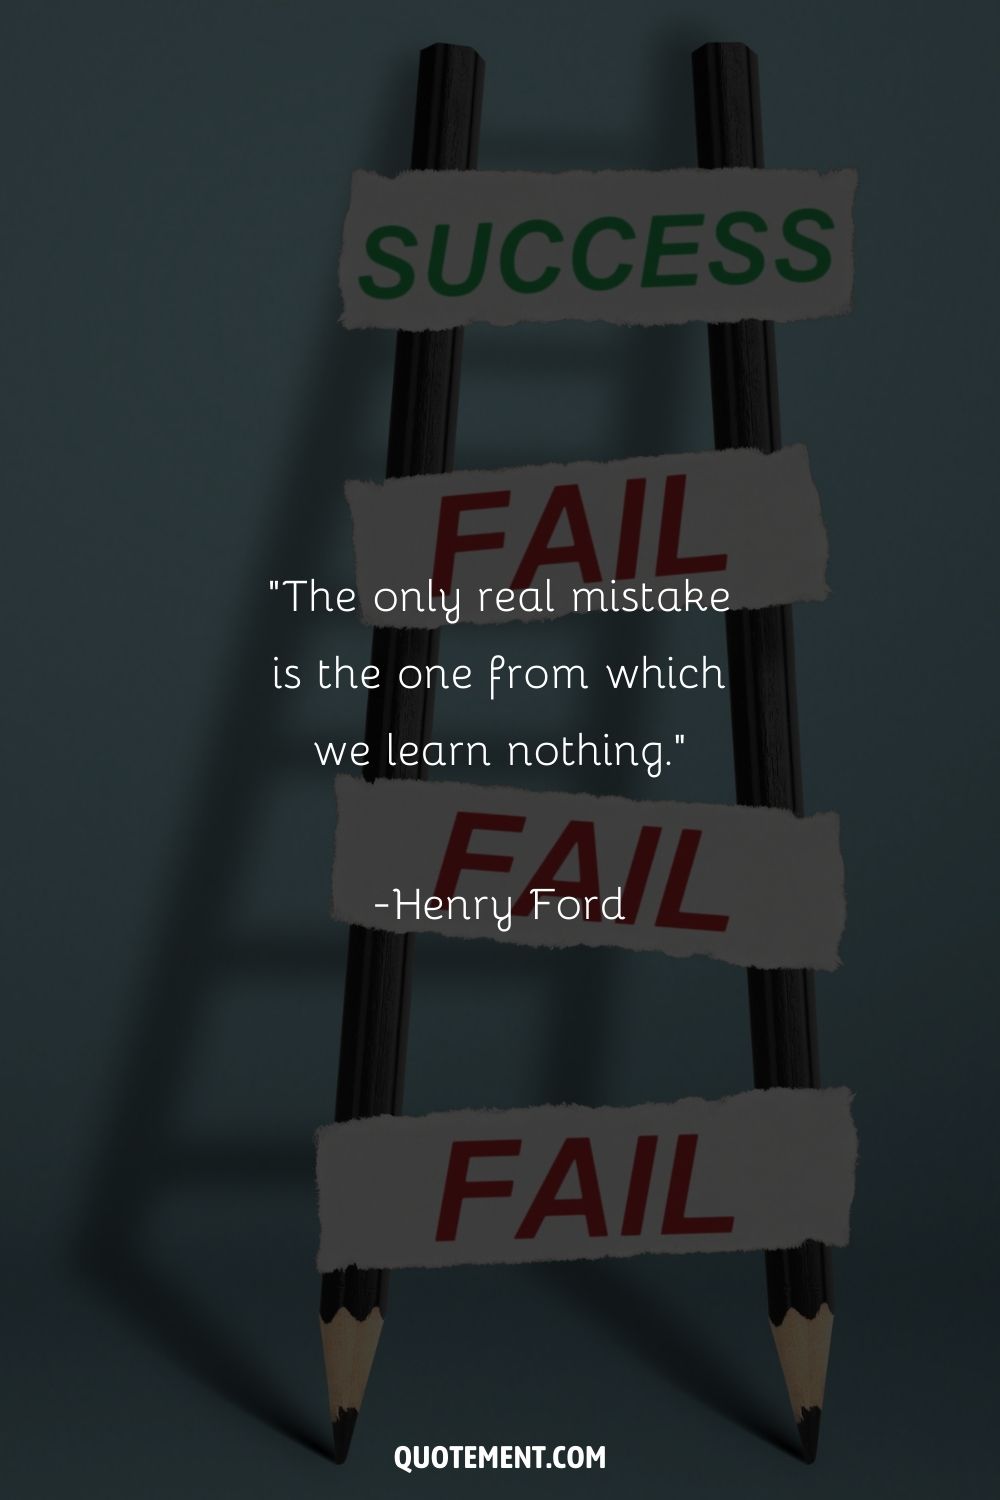 “The only real mistake is the one from which we learn nothing.” ― Henry Ford